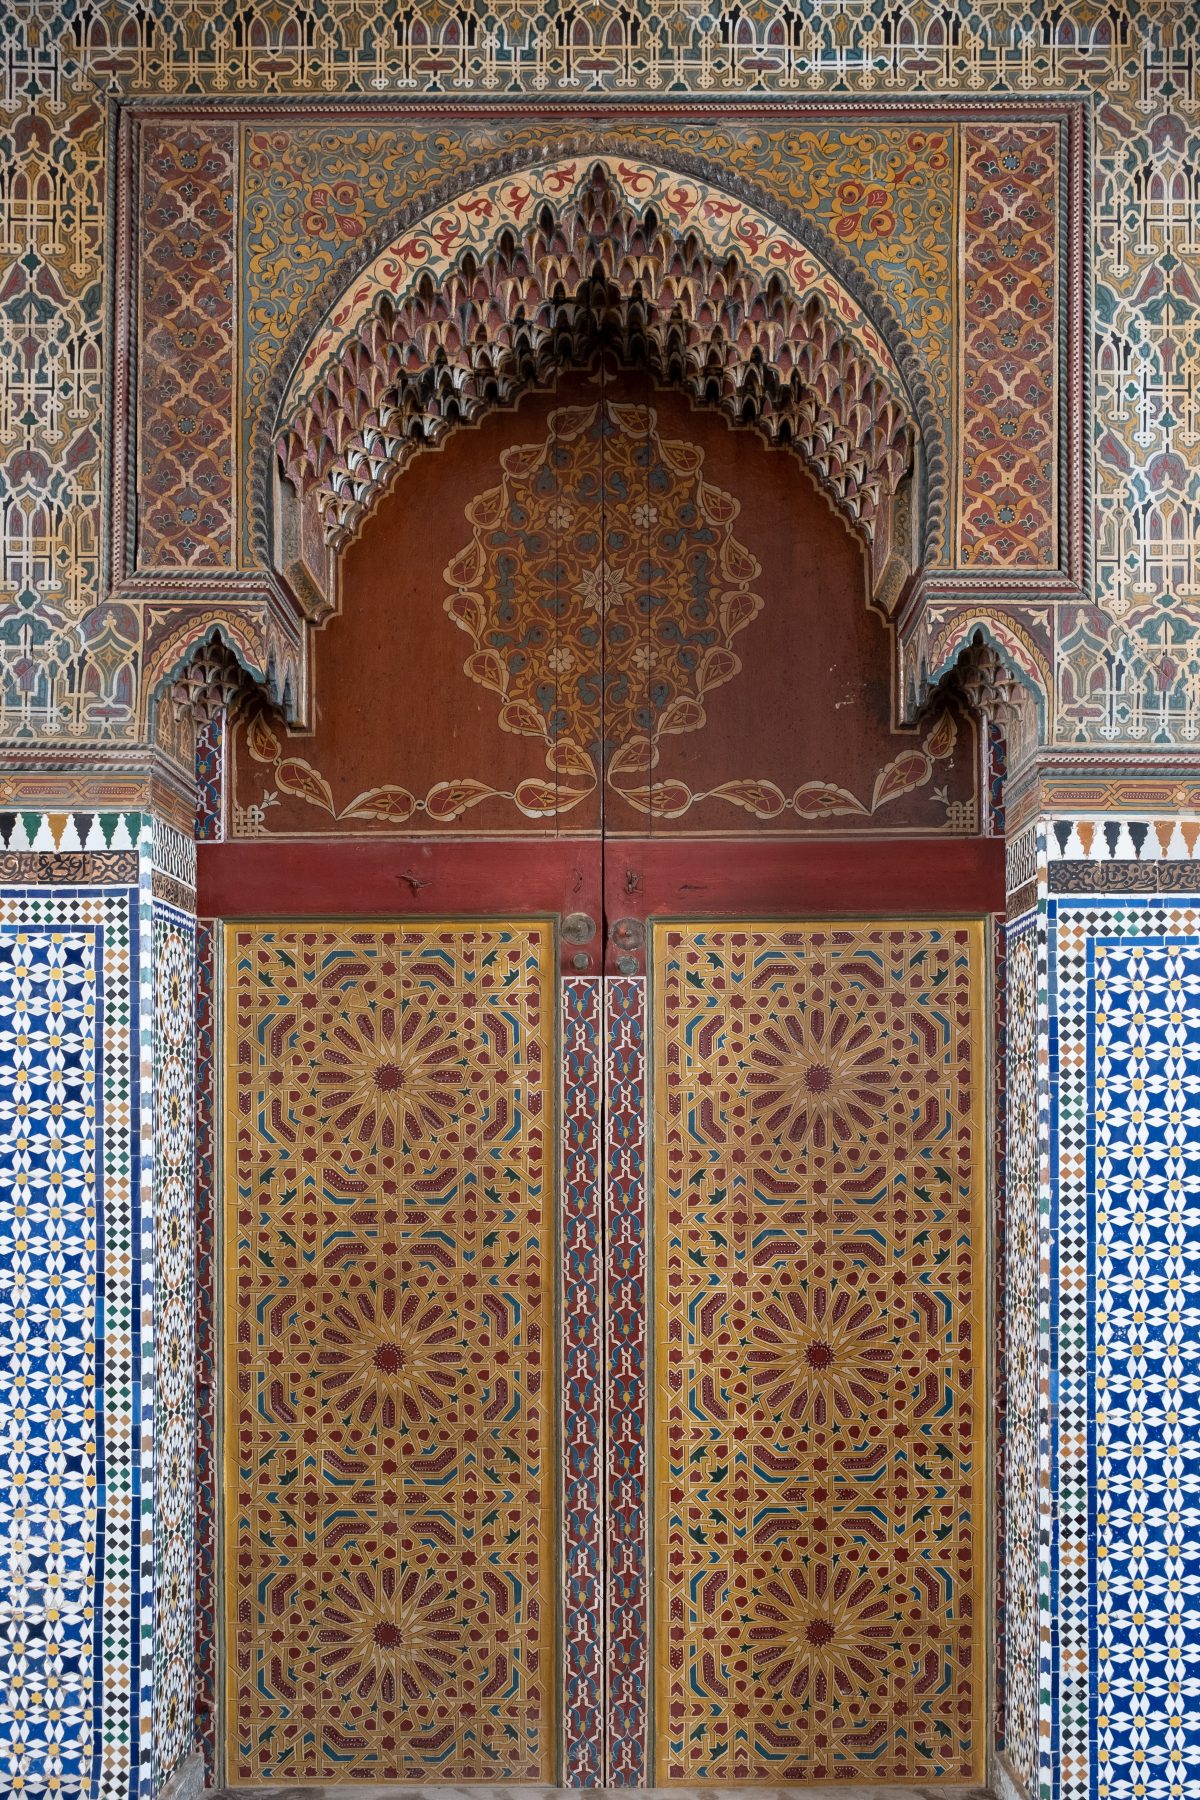 gallery image for Private Photography Tour Marrakech